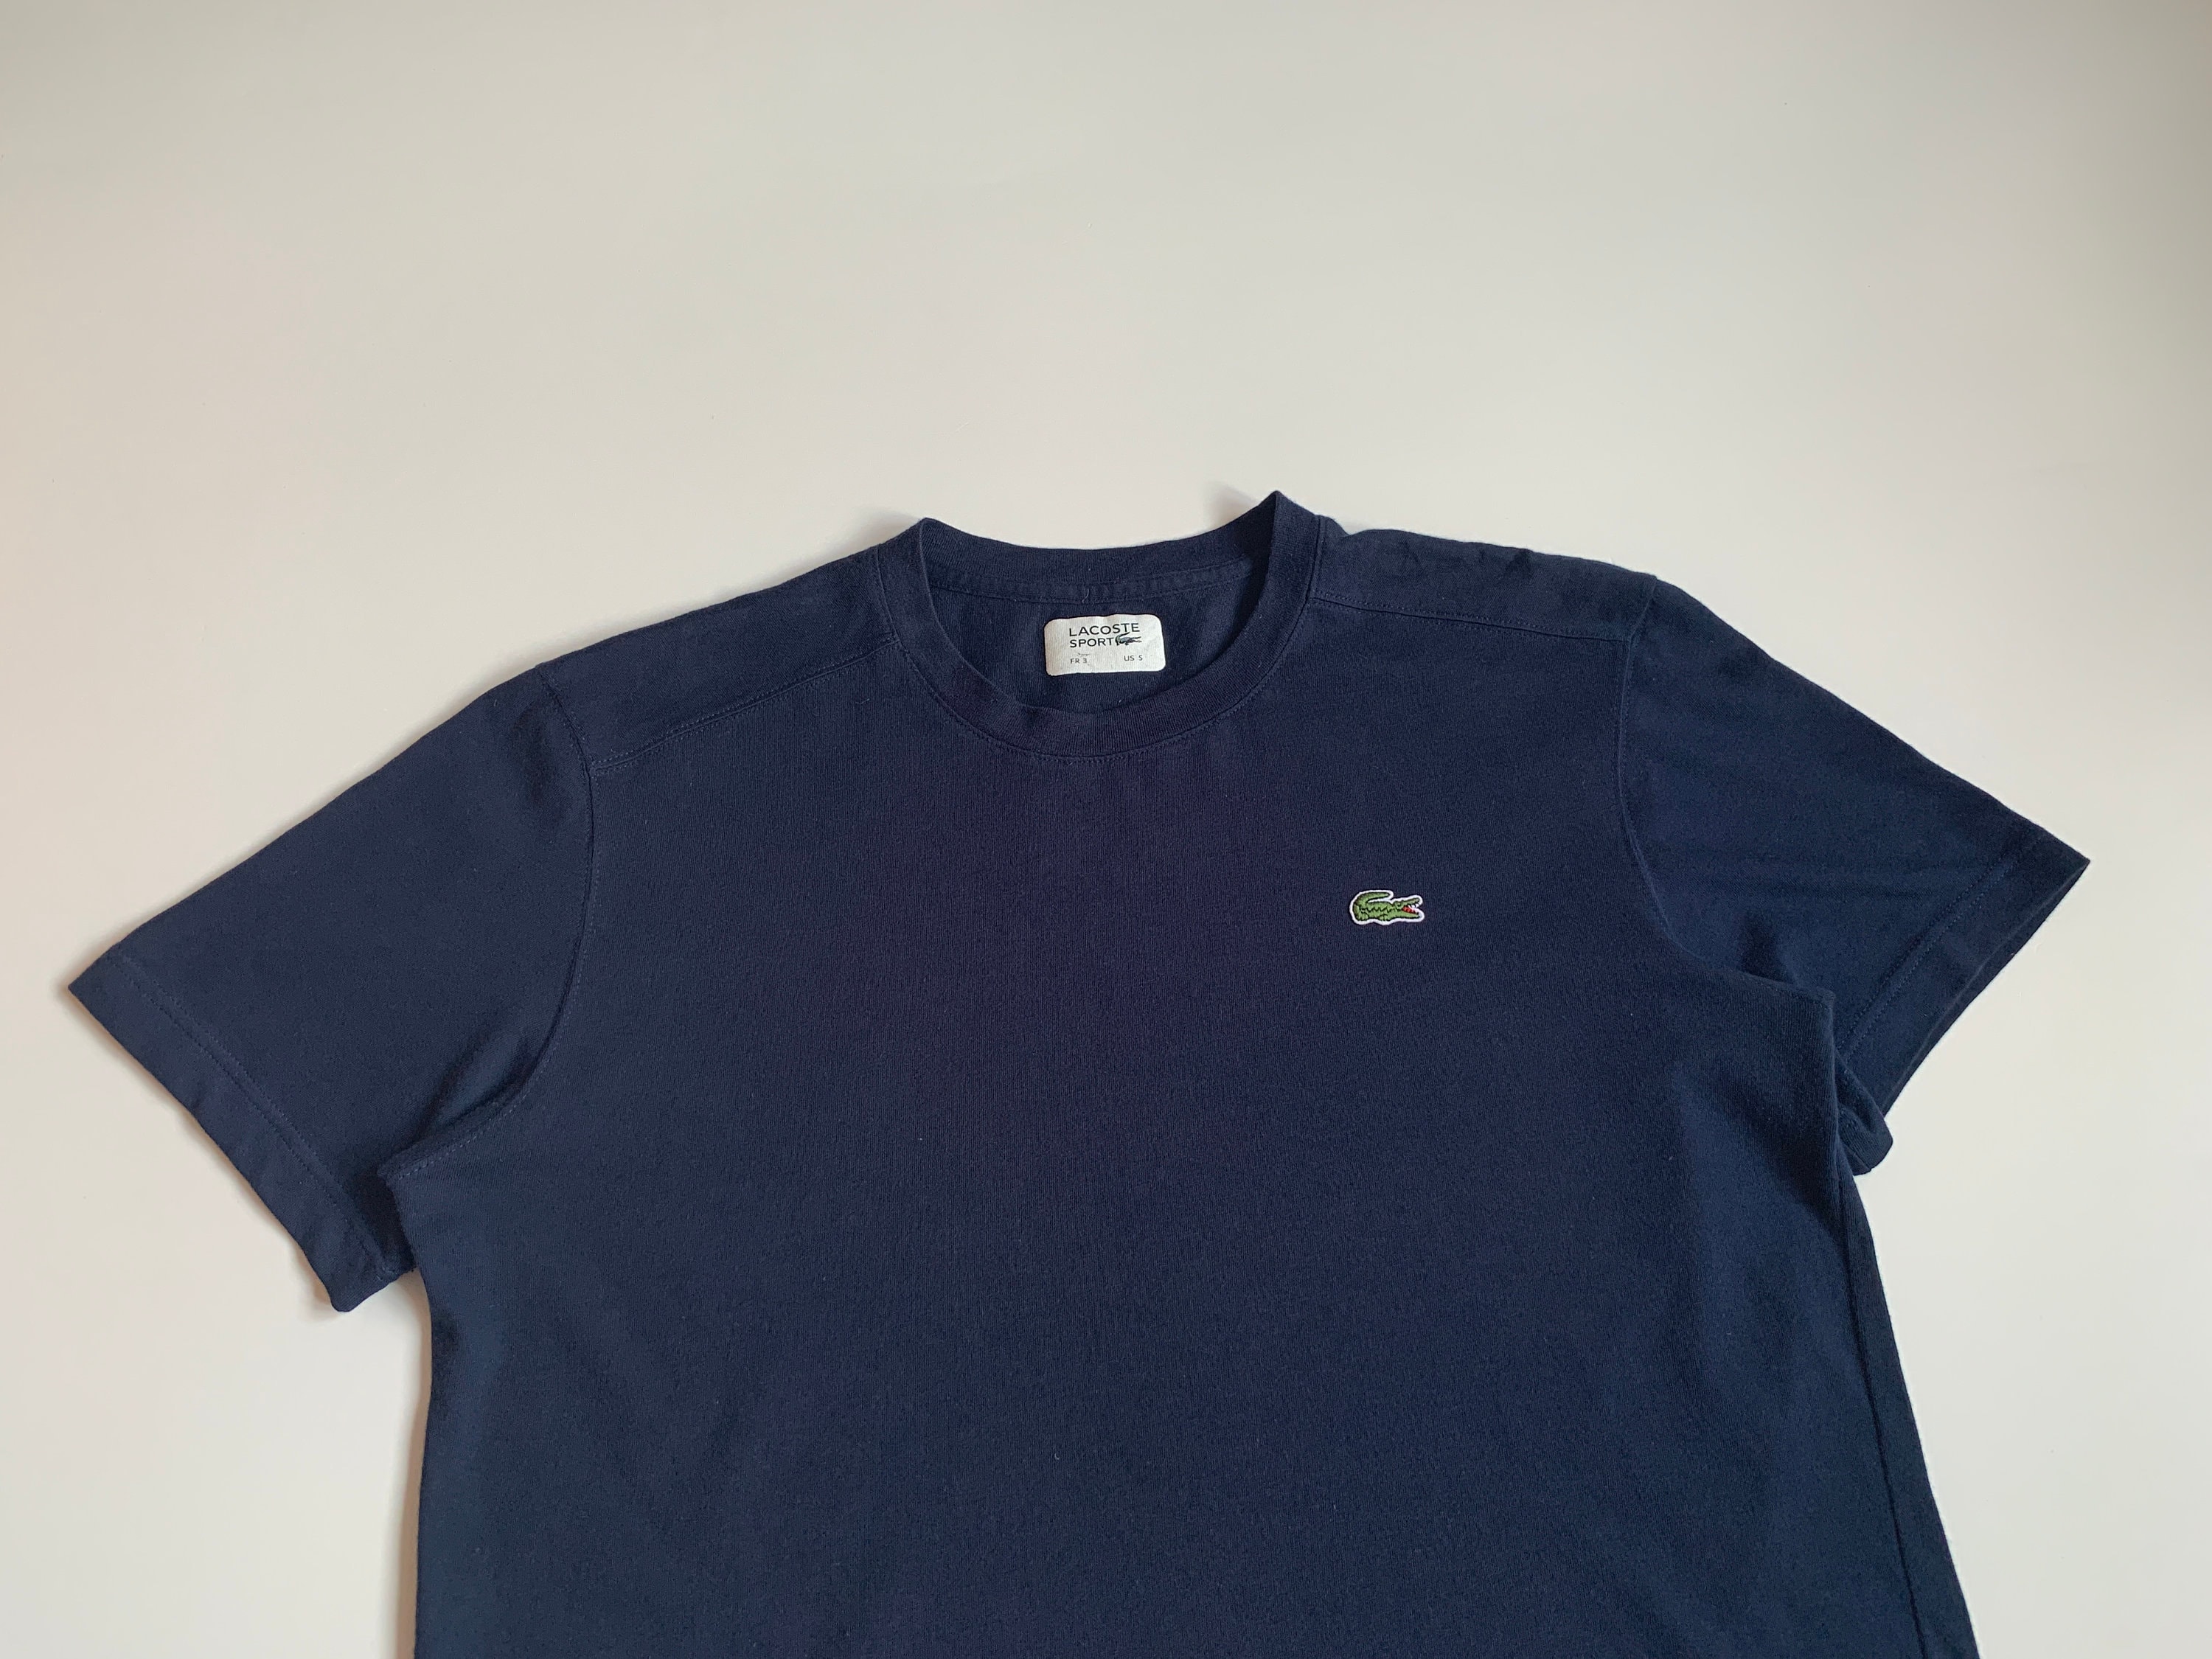 Lacoste Sport Ultra Dry Mens T-shirt Size S Navy Blue | Etsy